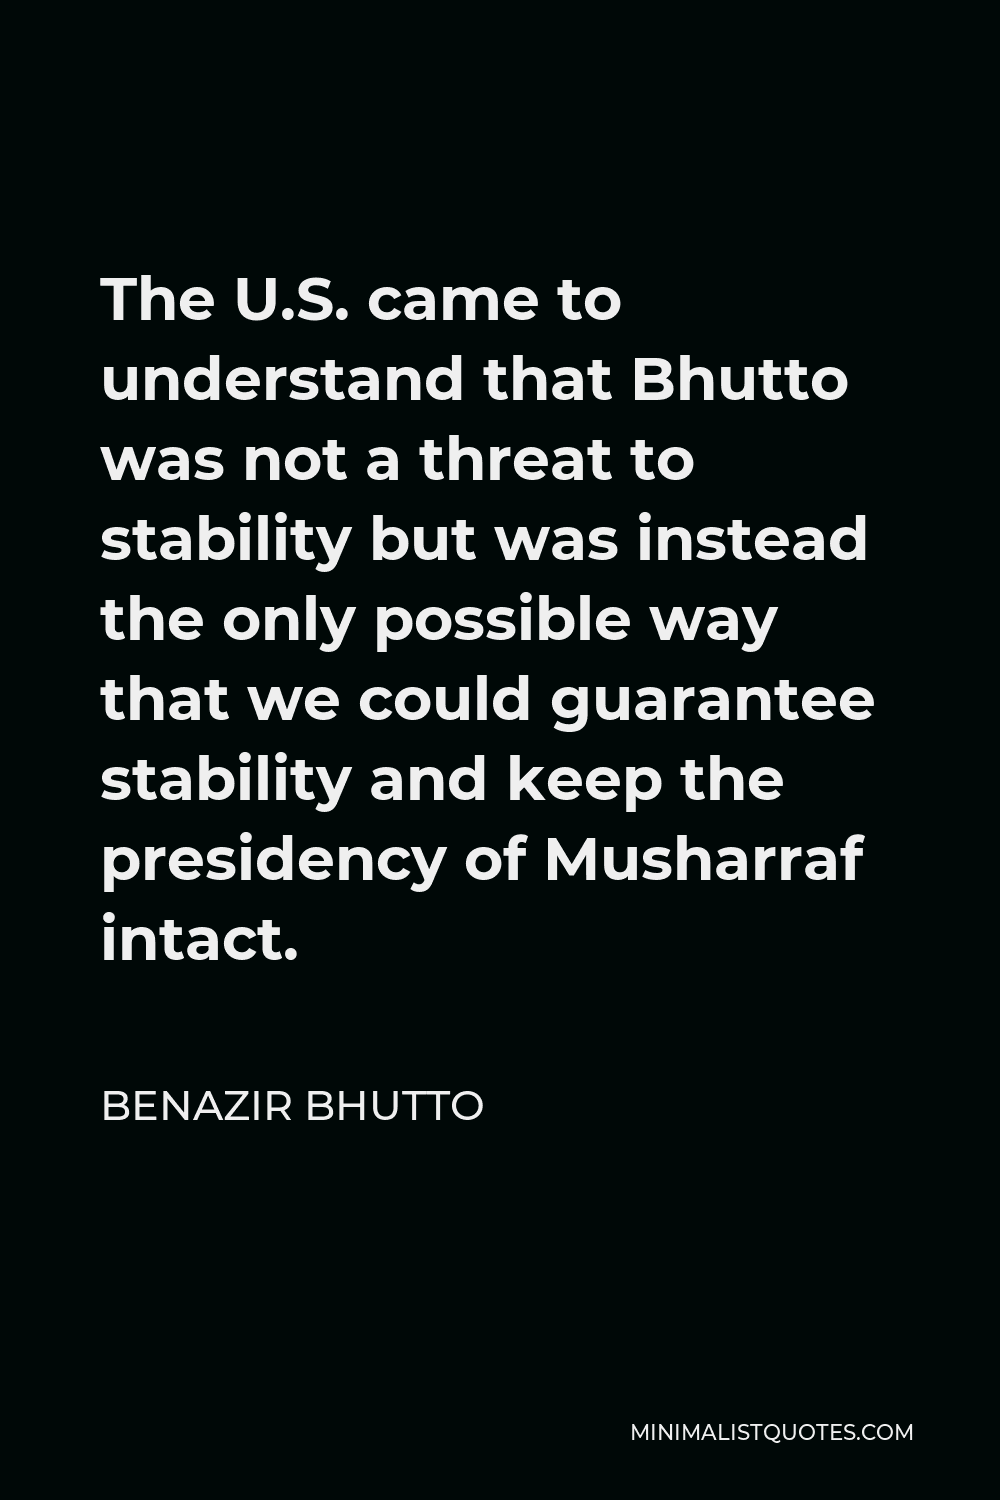 Benazir Bhutto Quote - The U.S. came to understand that Bhutto was not a threat to stability but was instead the only possible way that we could guarantee stability and keep the presidency of Musharraf intact.